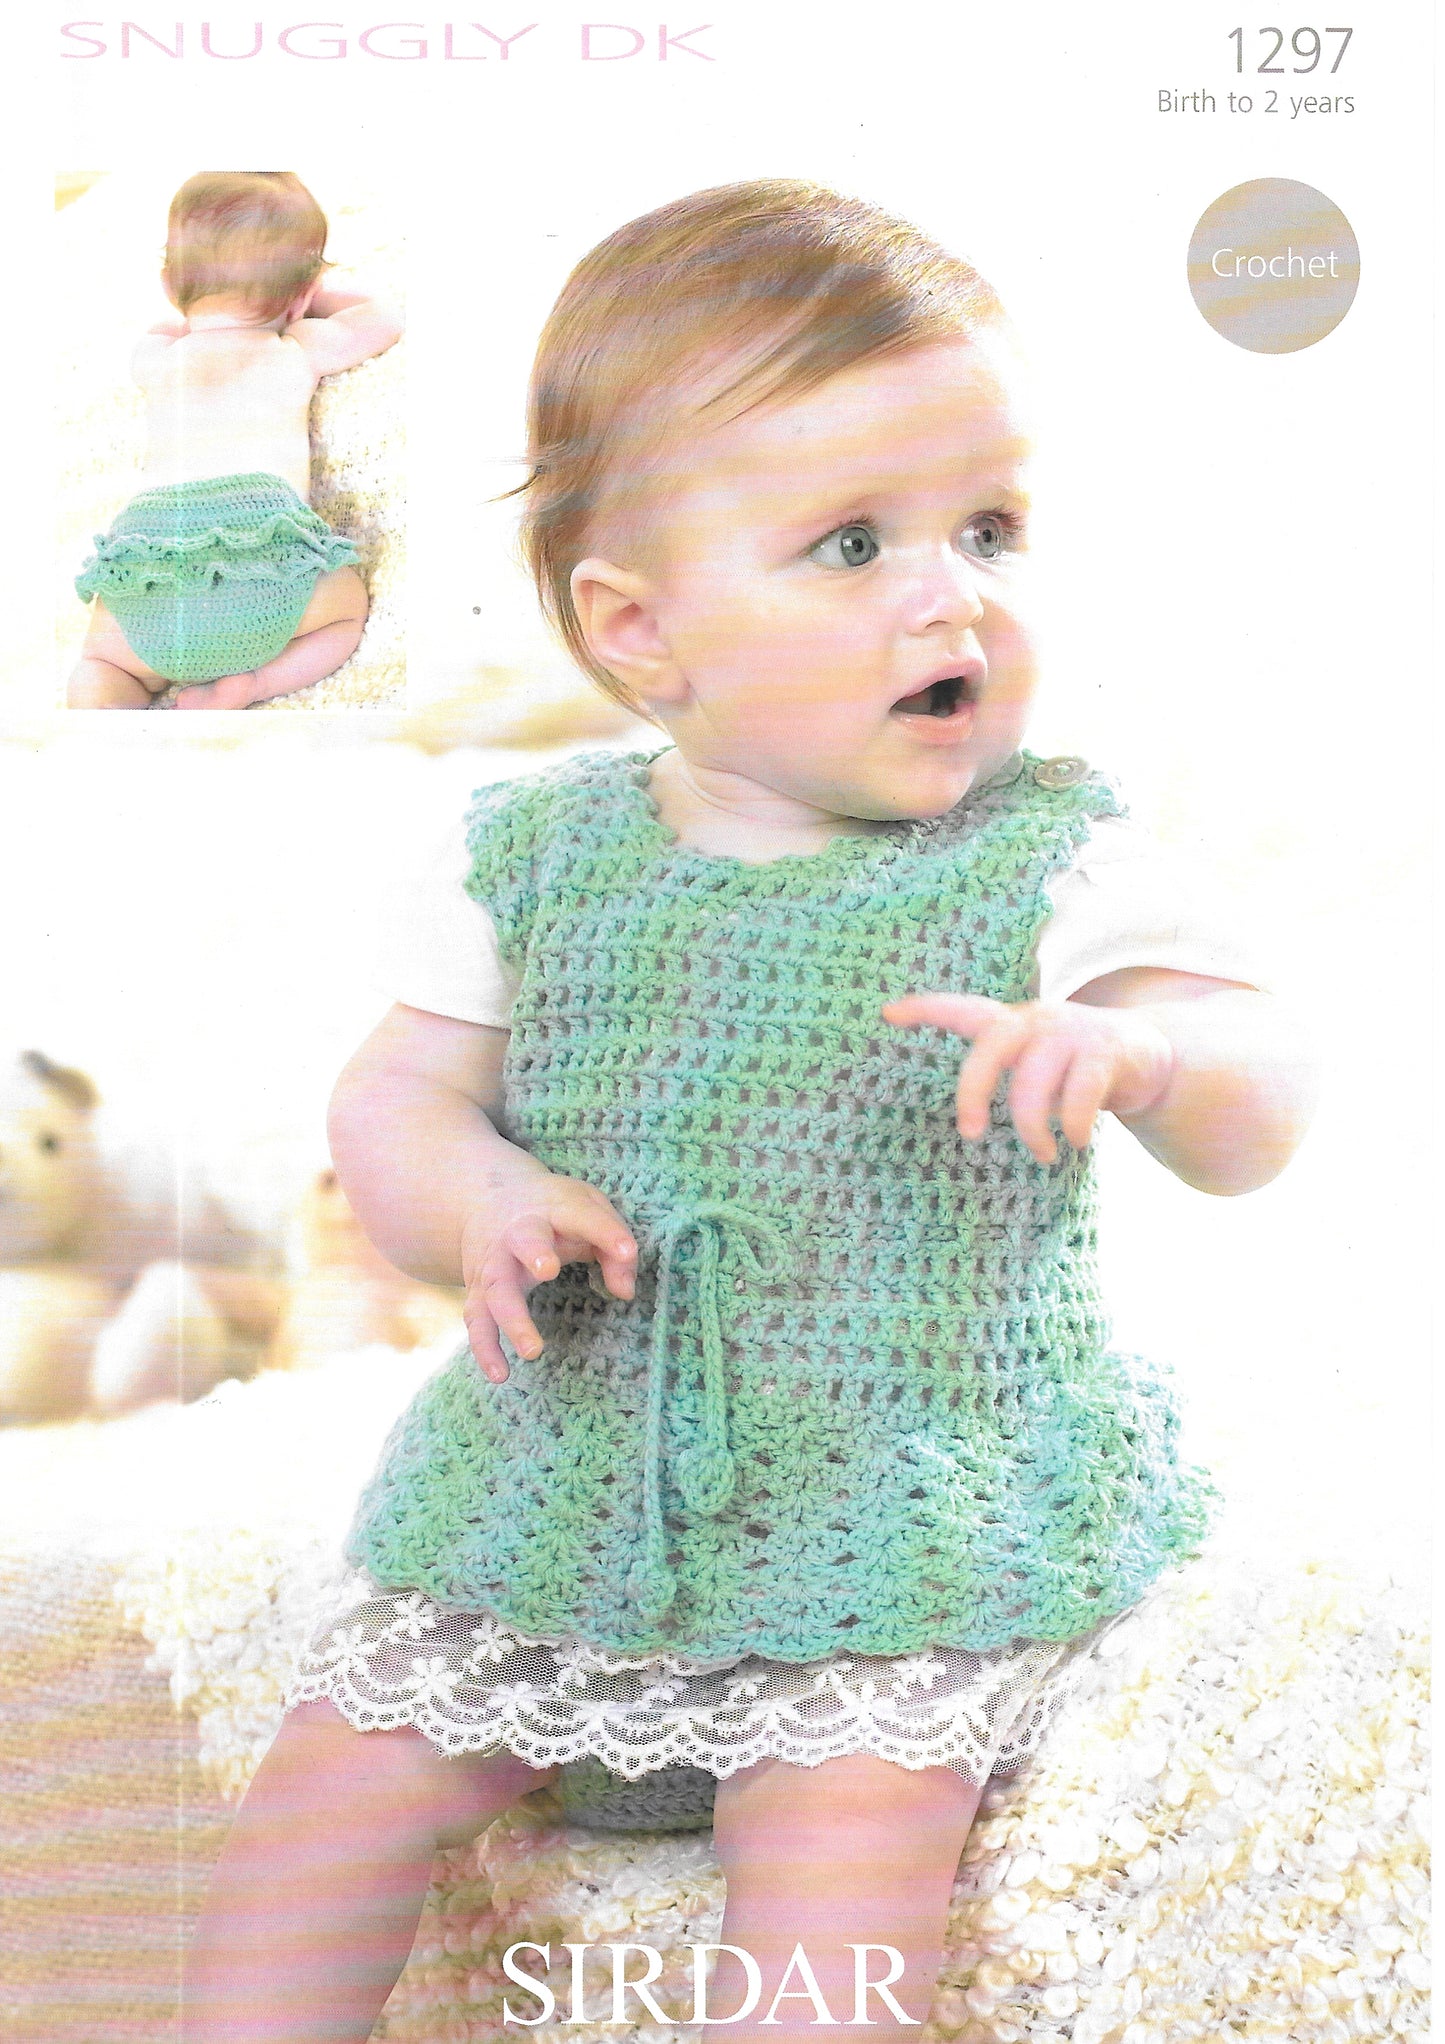 Preloved Sirdar 1297 Snuggly Dk Pinafore and Pants Crochet pattern